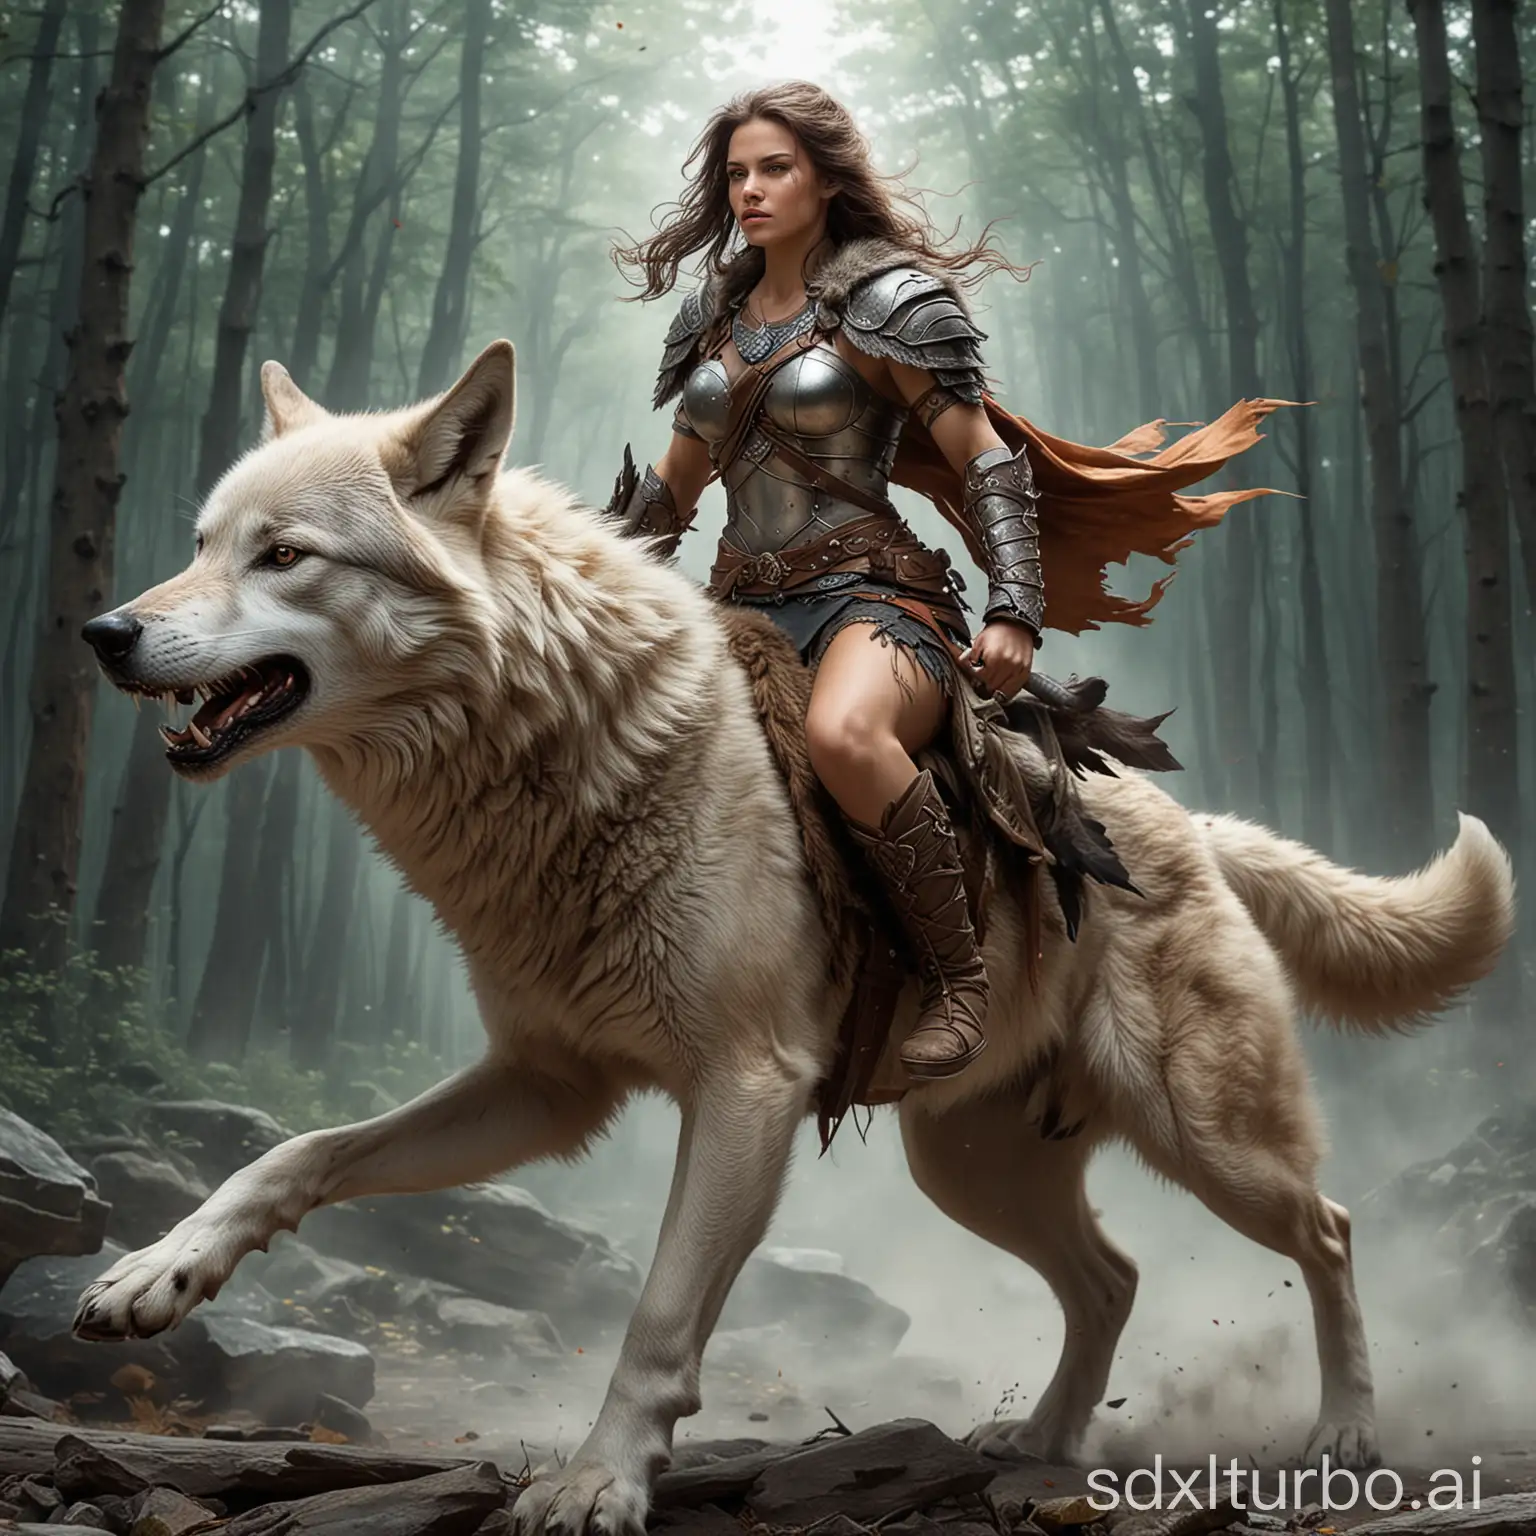 Female-Warrior-Riding-Wolf-Through-Enchanted-Forest